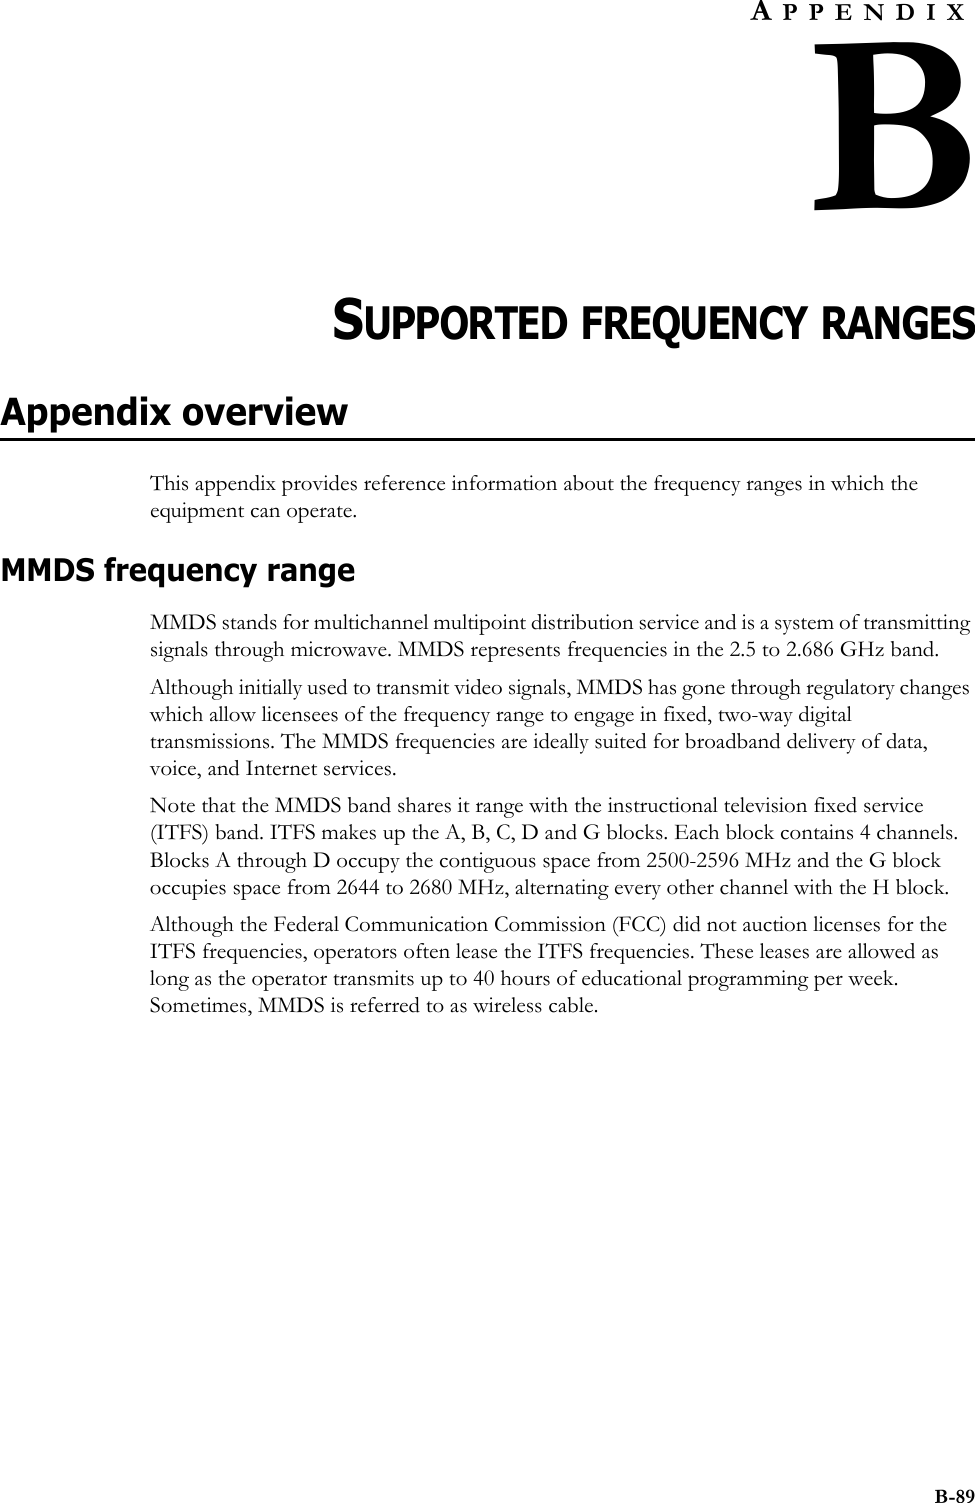 B-89APPENDIXBCHAPTER 0SUPPORTED FREQUENCY RANGESAppendix overviewThis appendix provides reference information about the frequency ranges in which the equipment can operate. MMDS frequency rangeMMDS stands for multichannel multipoint distribution service and is a system of transmitting signals through microwave. MMDS represents frequencies in the 2.5 to 2.686 GHz band. Although initially used to transmit video signals, MMDS has gone through regulatory changes which allow licensees of the frequency range to engage in fixed, two-way digital transmissions. The MMDS frequencies are ideally suited for broadband delivery of data, voice, and Internet services. Note that the MMDS band shares it range with the instructional television fixed service (ITFS) band. ITFS makes up the A, B, C, D and G blocks. Each block contains 4 channels. Blocks A through D occupy the contiguous space from 2500-2596 MHz and the G block occupies space from 2644 to 2680 MHz, alternating every other channel with the H block. Although the Federal Communication Commission (FCC) did not auction licenses for the ITFS frequencies, operators often lease the ITFS frequencies. These leases are allowed as long as the operator transmits up to 40 hours of educational programming per week. Sometimes, MMDS is referred to as wireless cable.